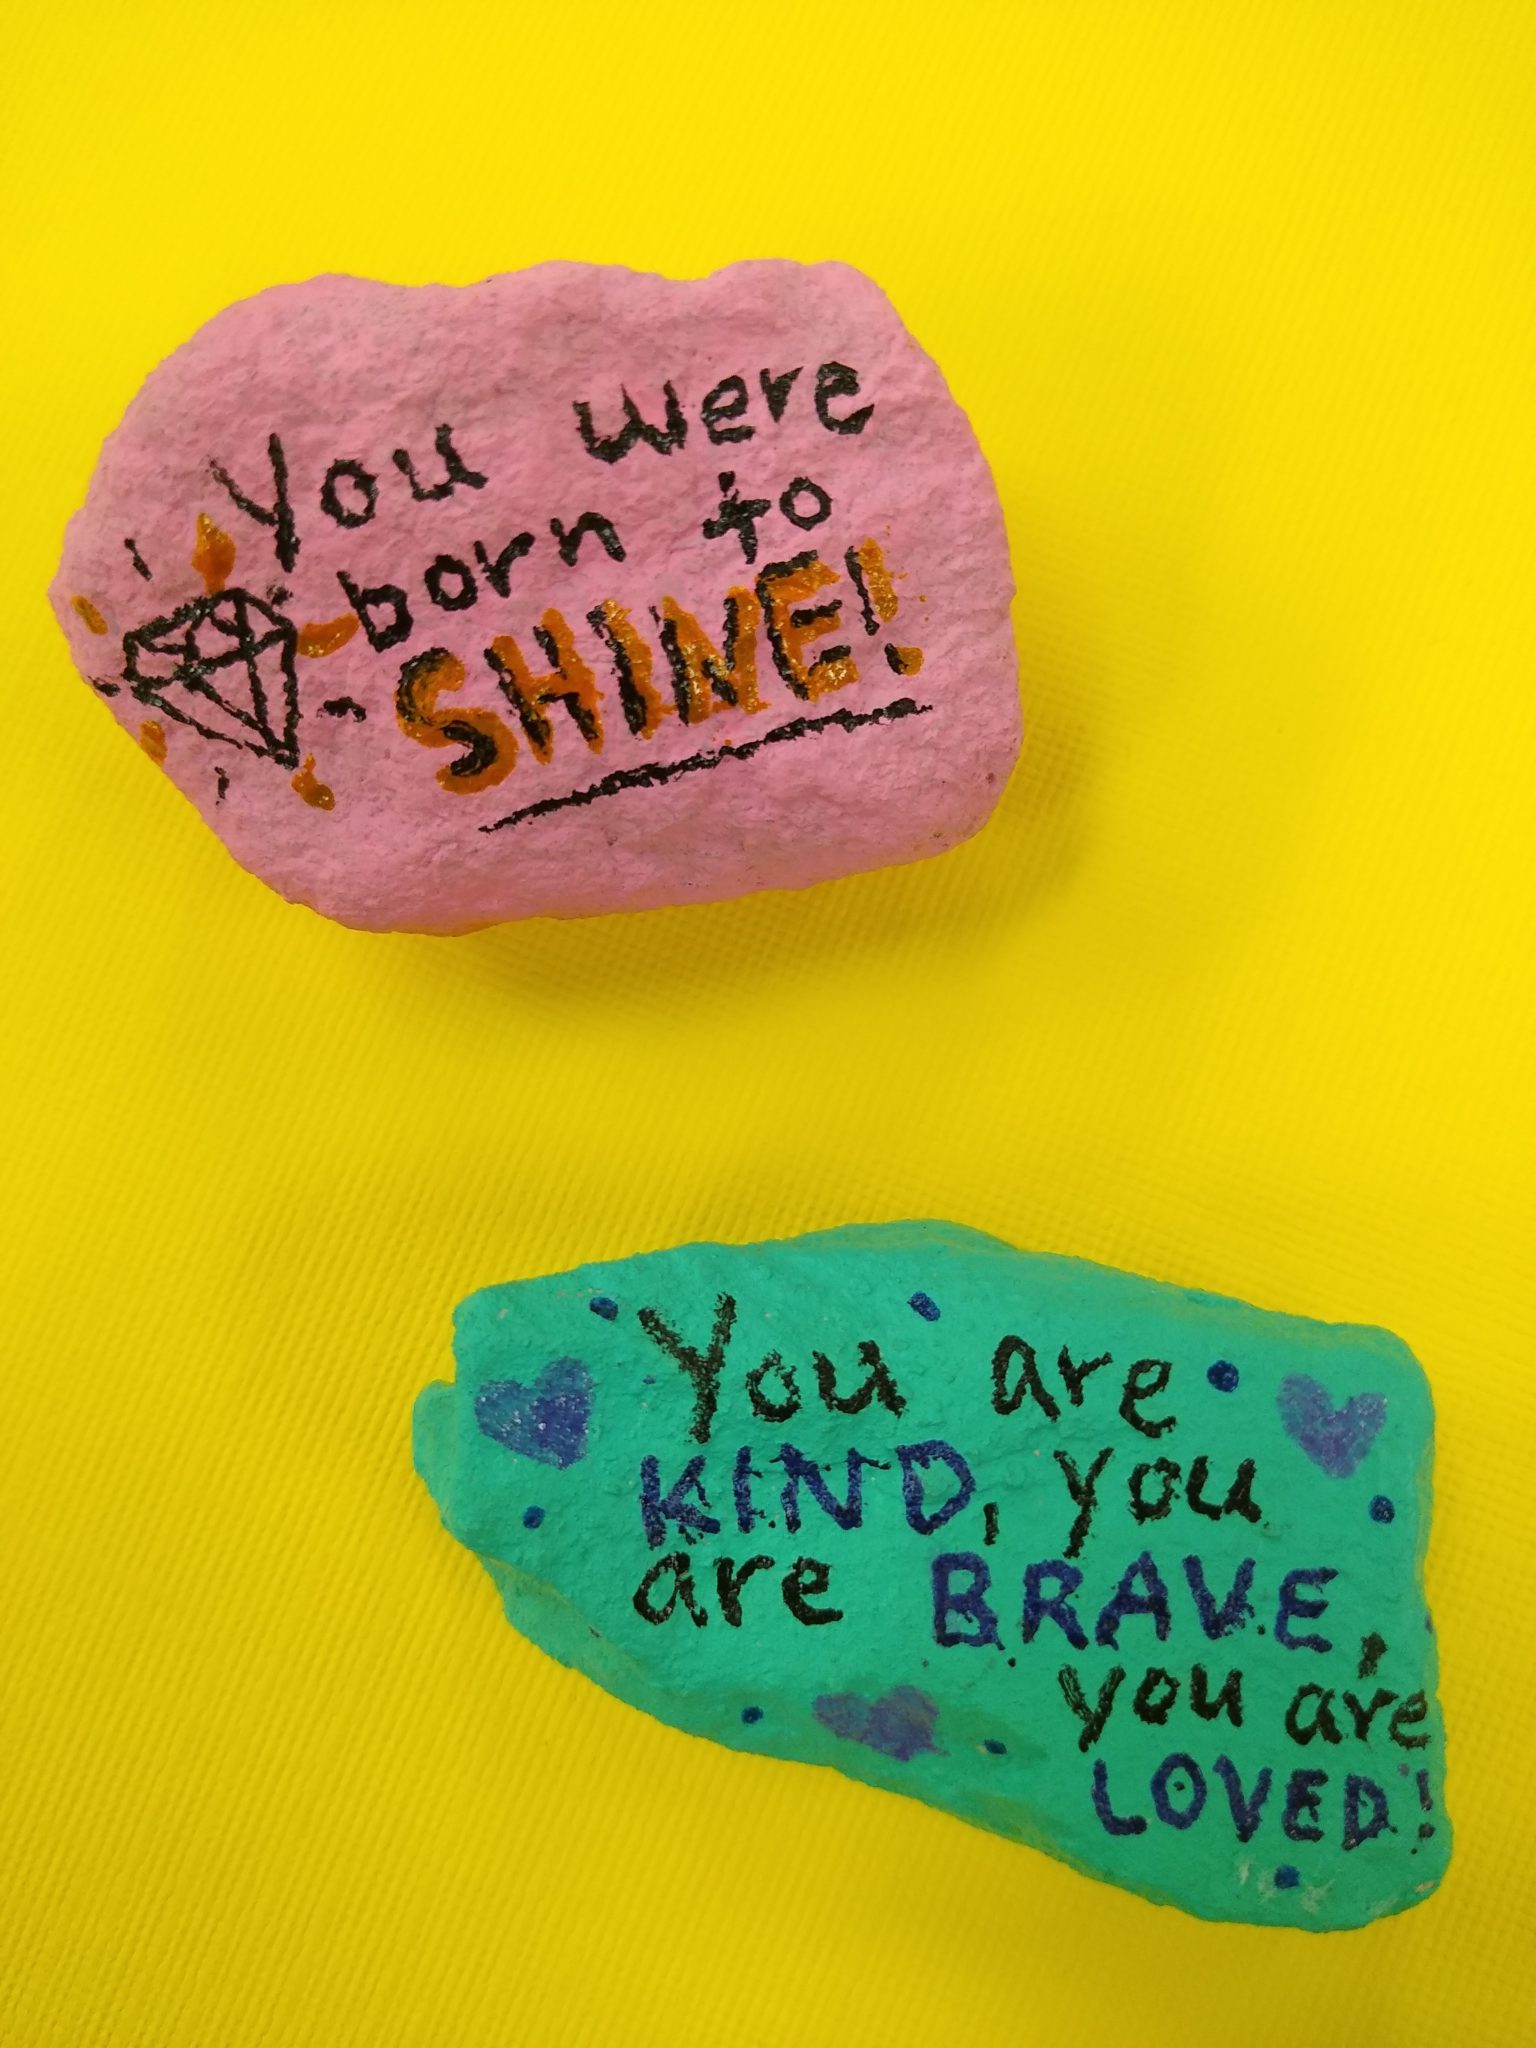 Two brightly painted rocks with the messages "You were born to shine" and "You are kind, you are brave, you are loved."